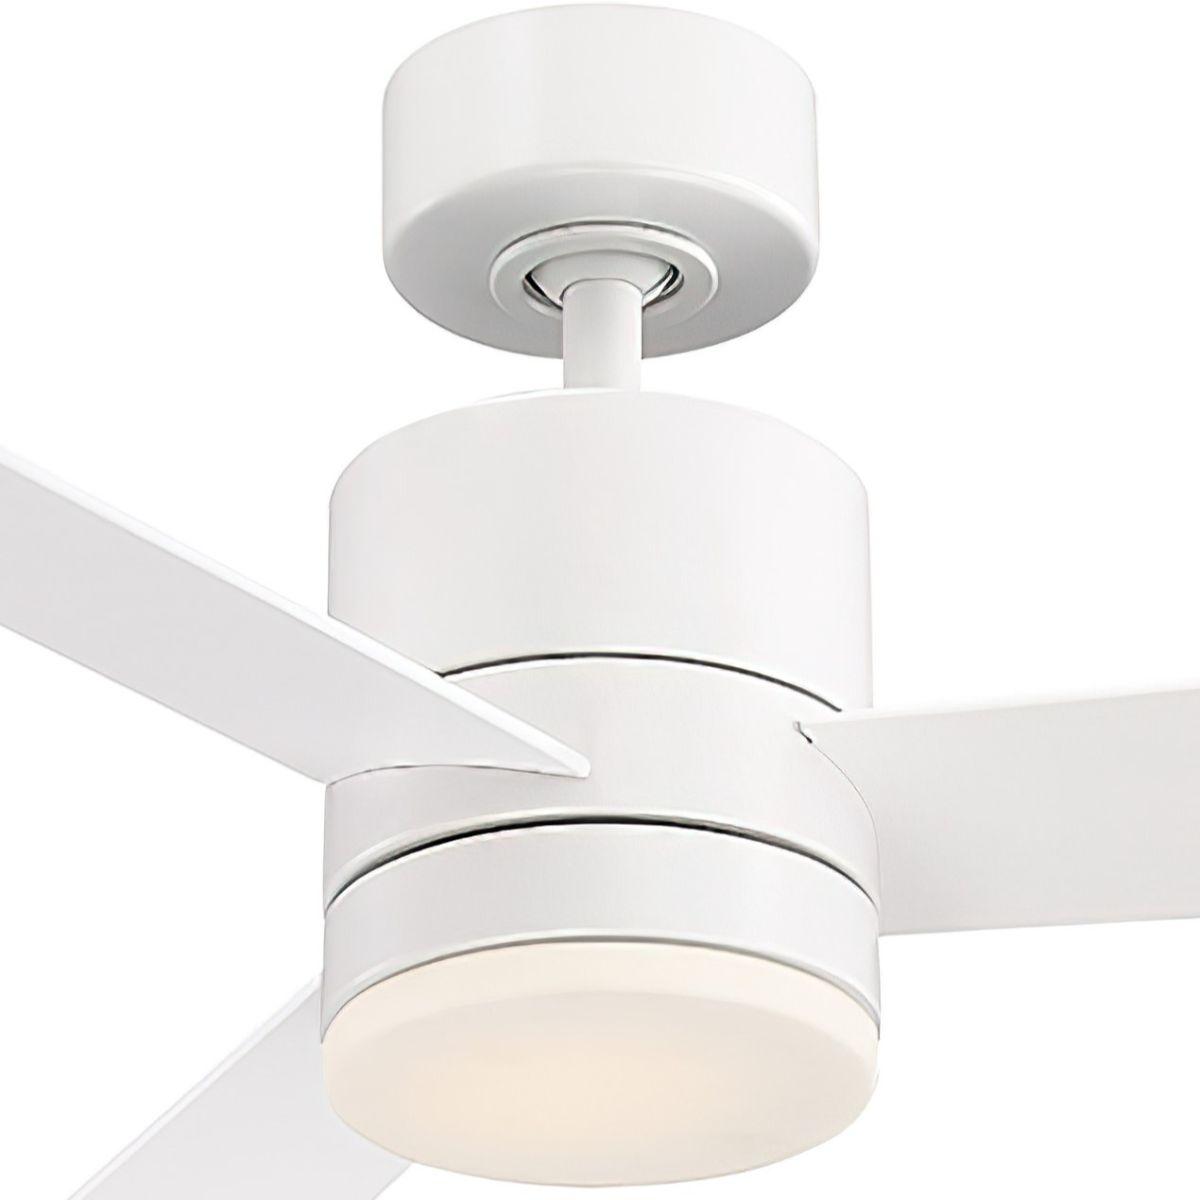 Axis 52 Inch Propeller Outdoor Smart Ceiling Fan With 3000K LED And Remote